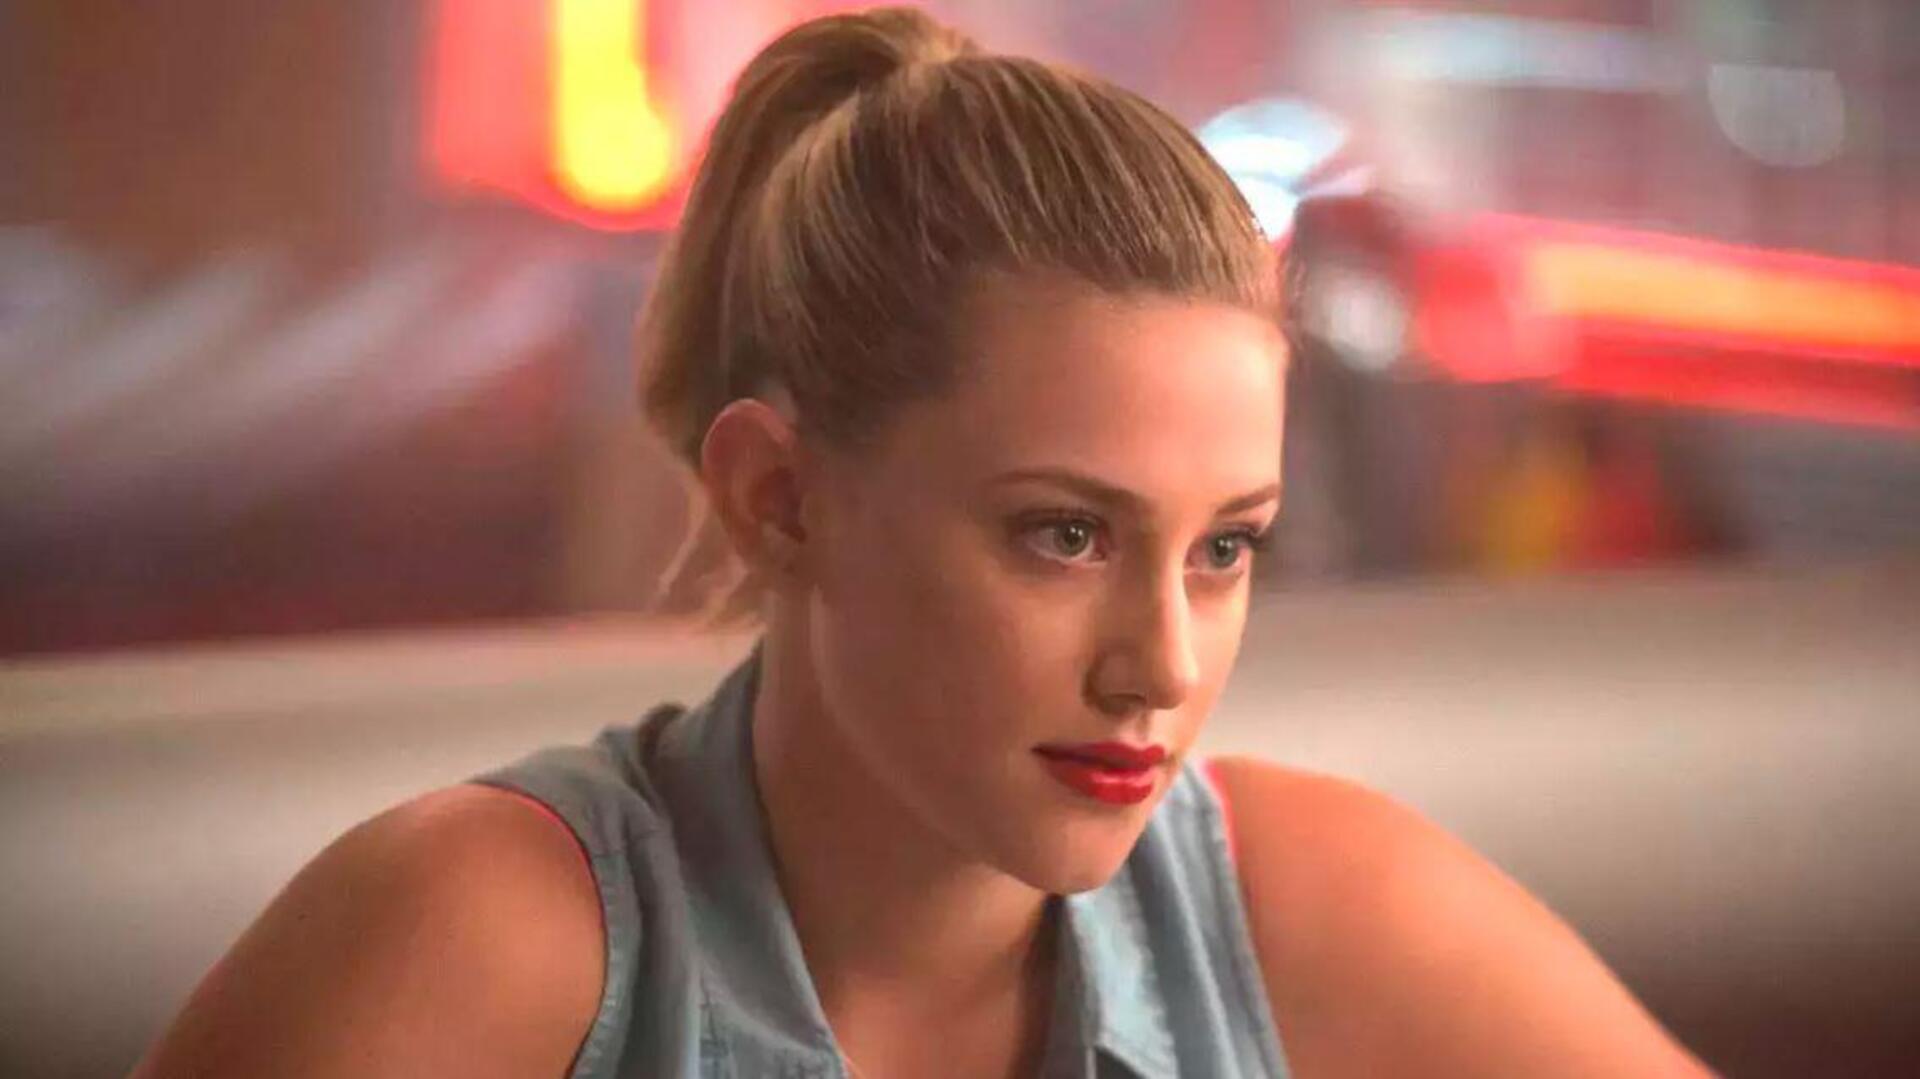 Times 'Riverdale' actor Lili Reinhart opened up about mental/physical struggles